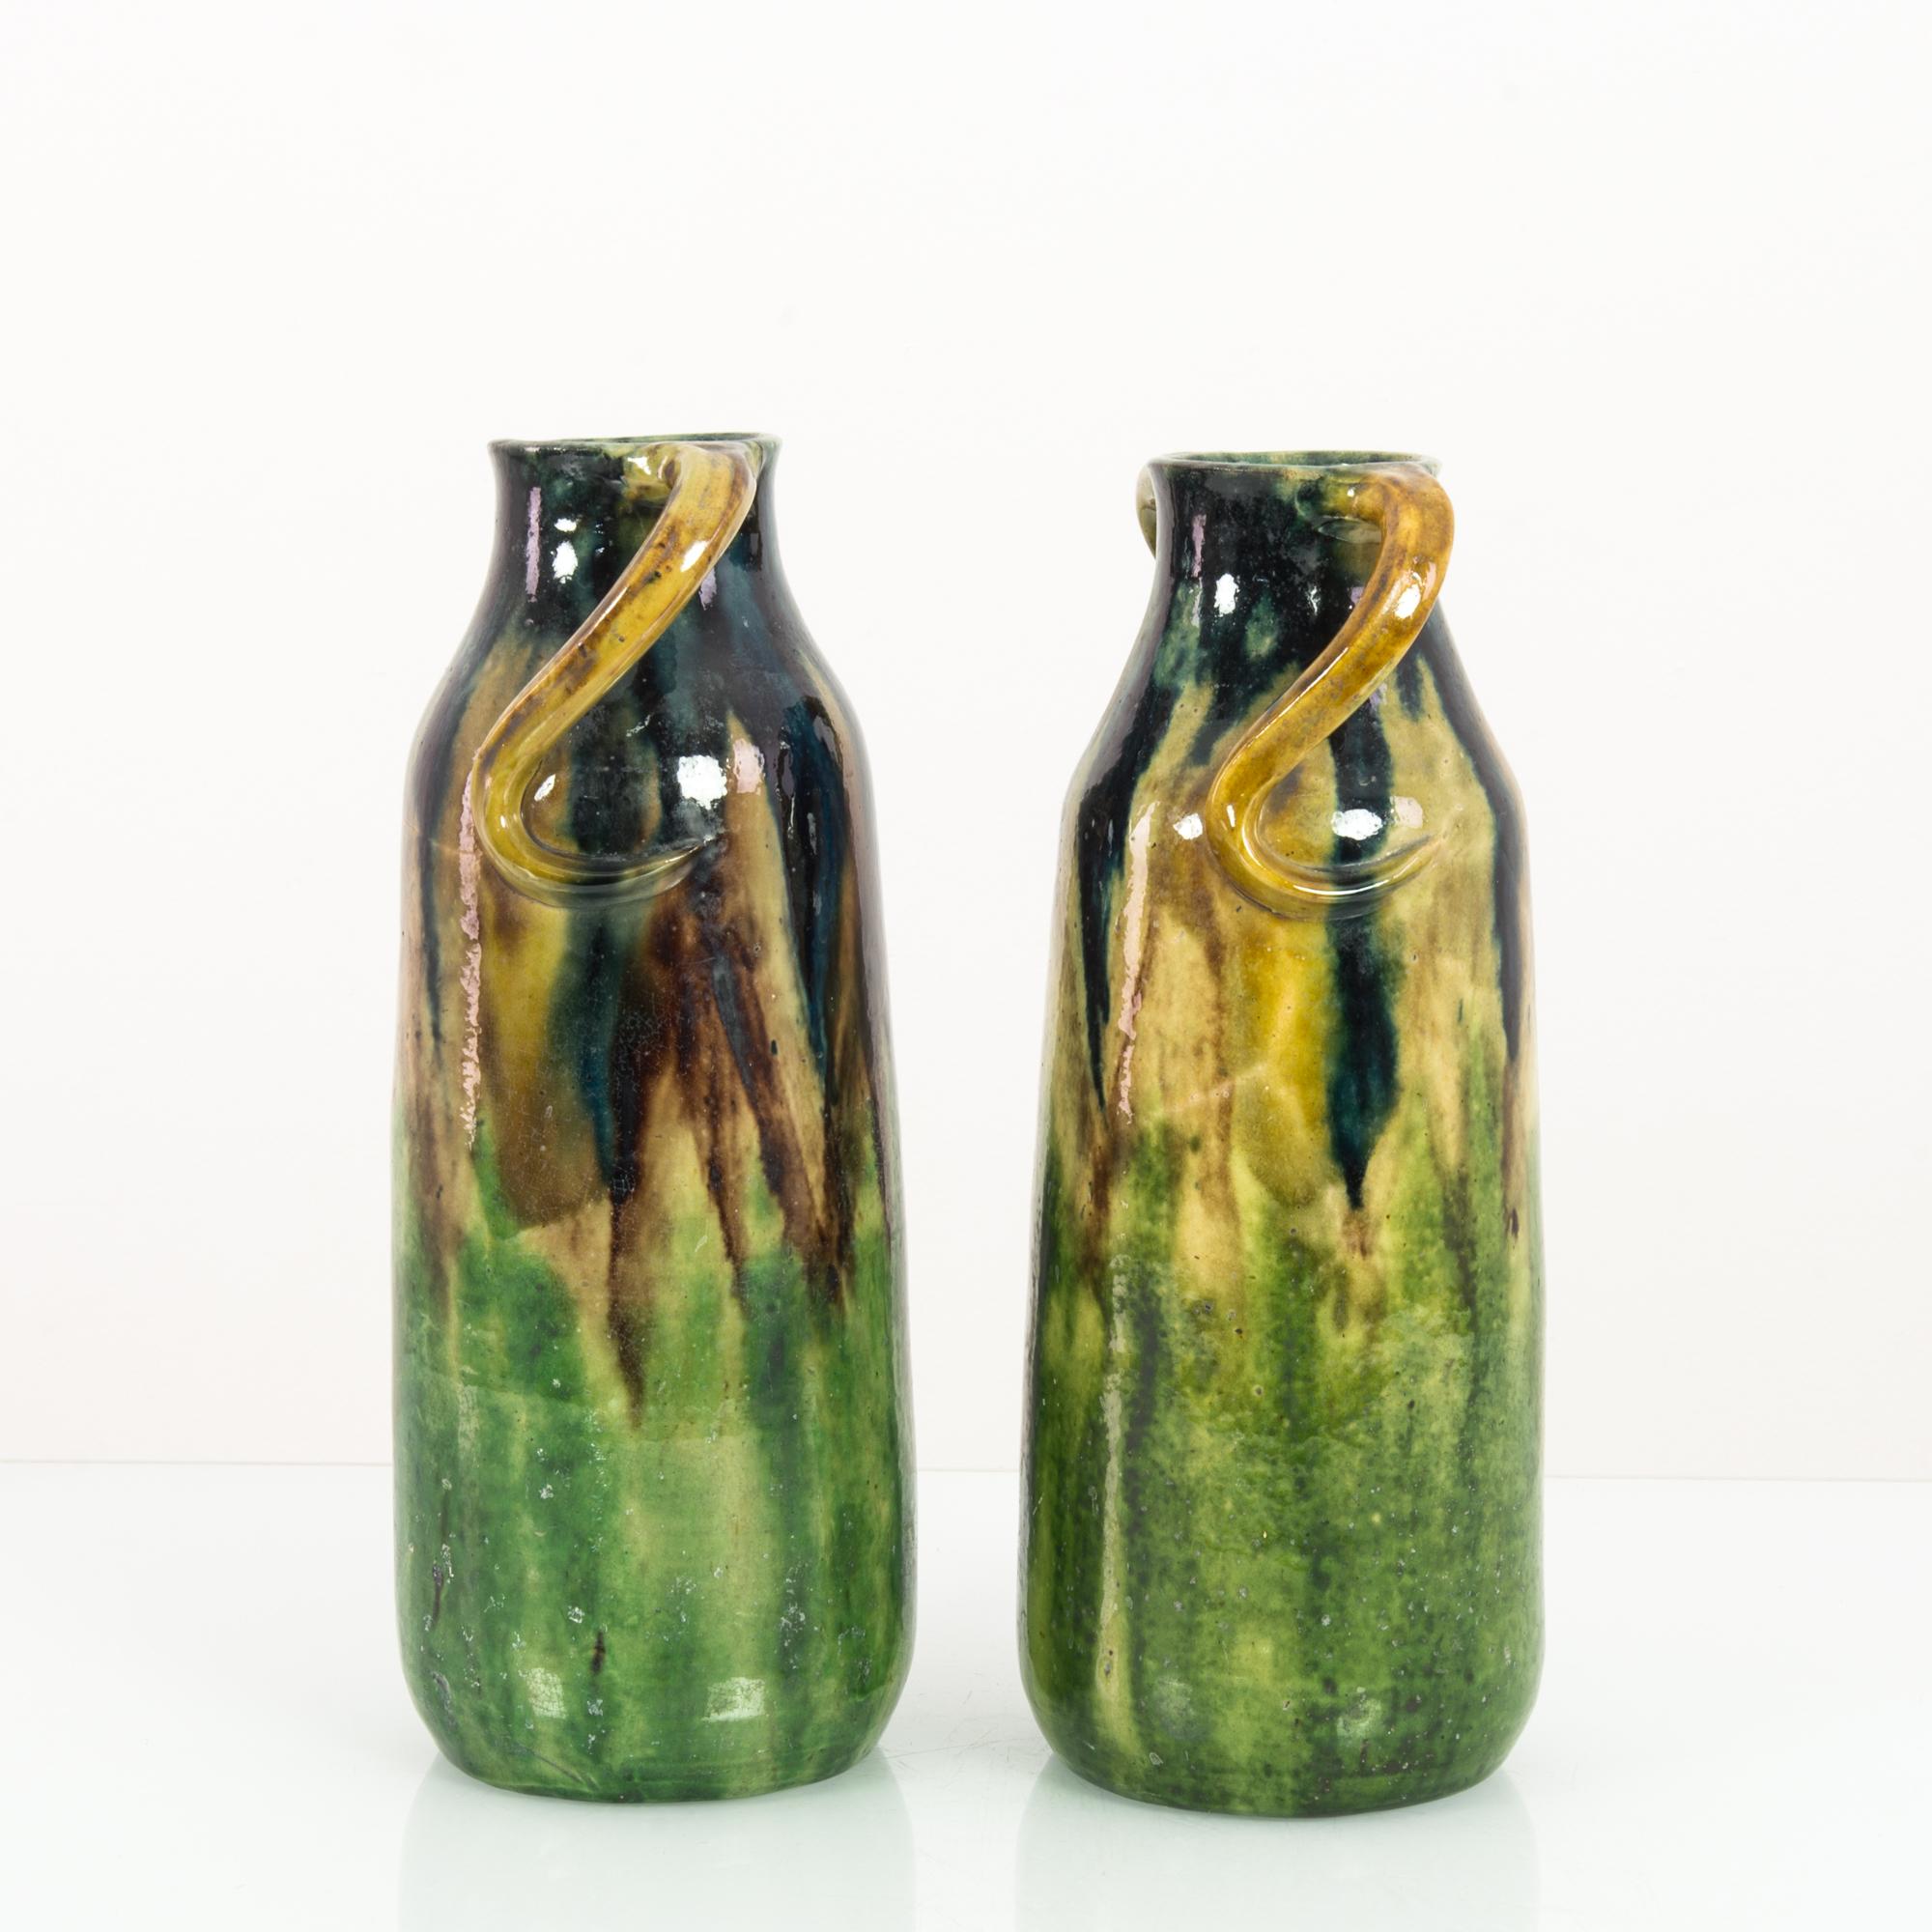 A pair of ceramic vases from West Germany, circa 1960. Streaks of forest colors create a dappled, sylvan effect — emerald, pine green, ochre. Twisting handles which emerge from the lip of the flasks add a whimsical touch. The subtle differences in